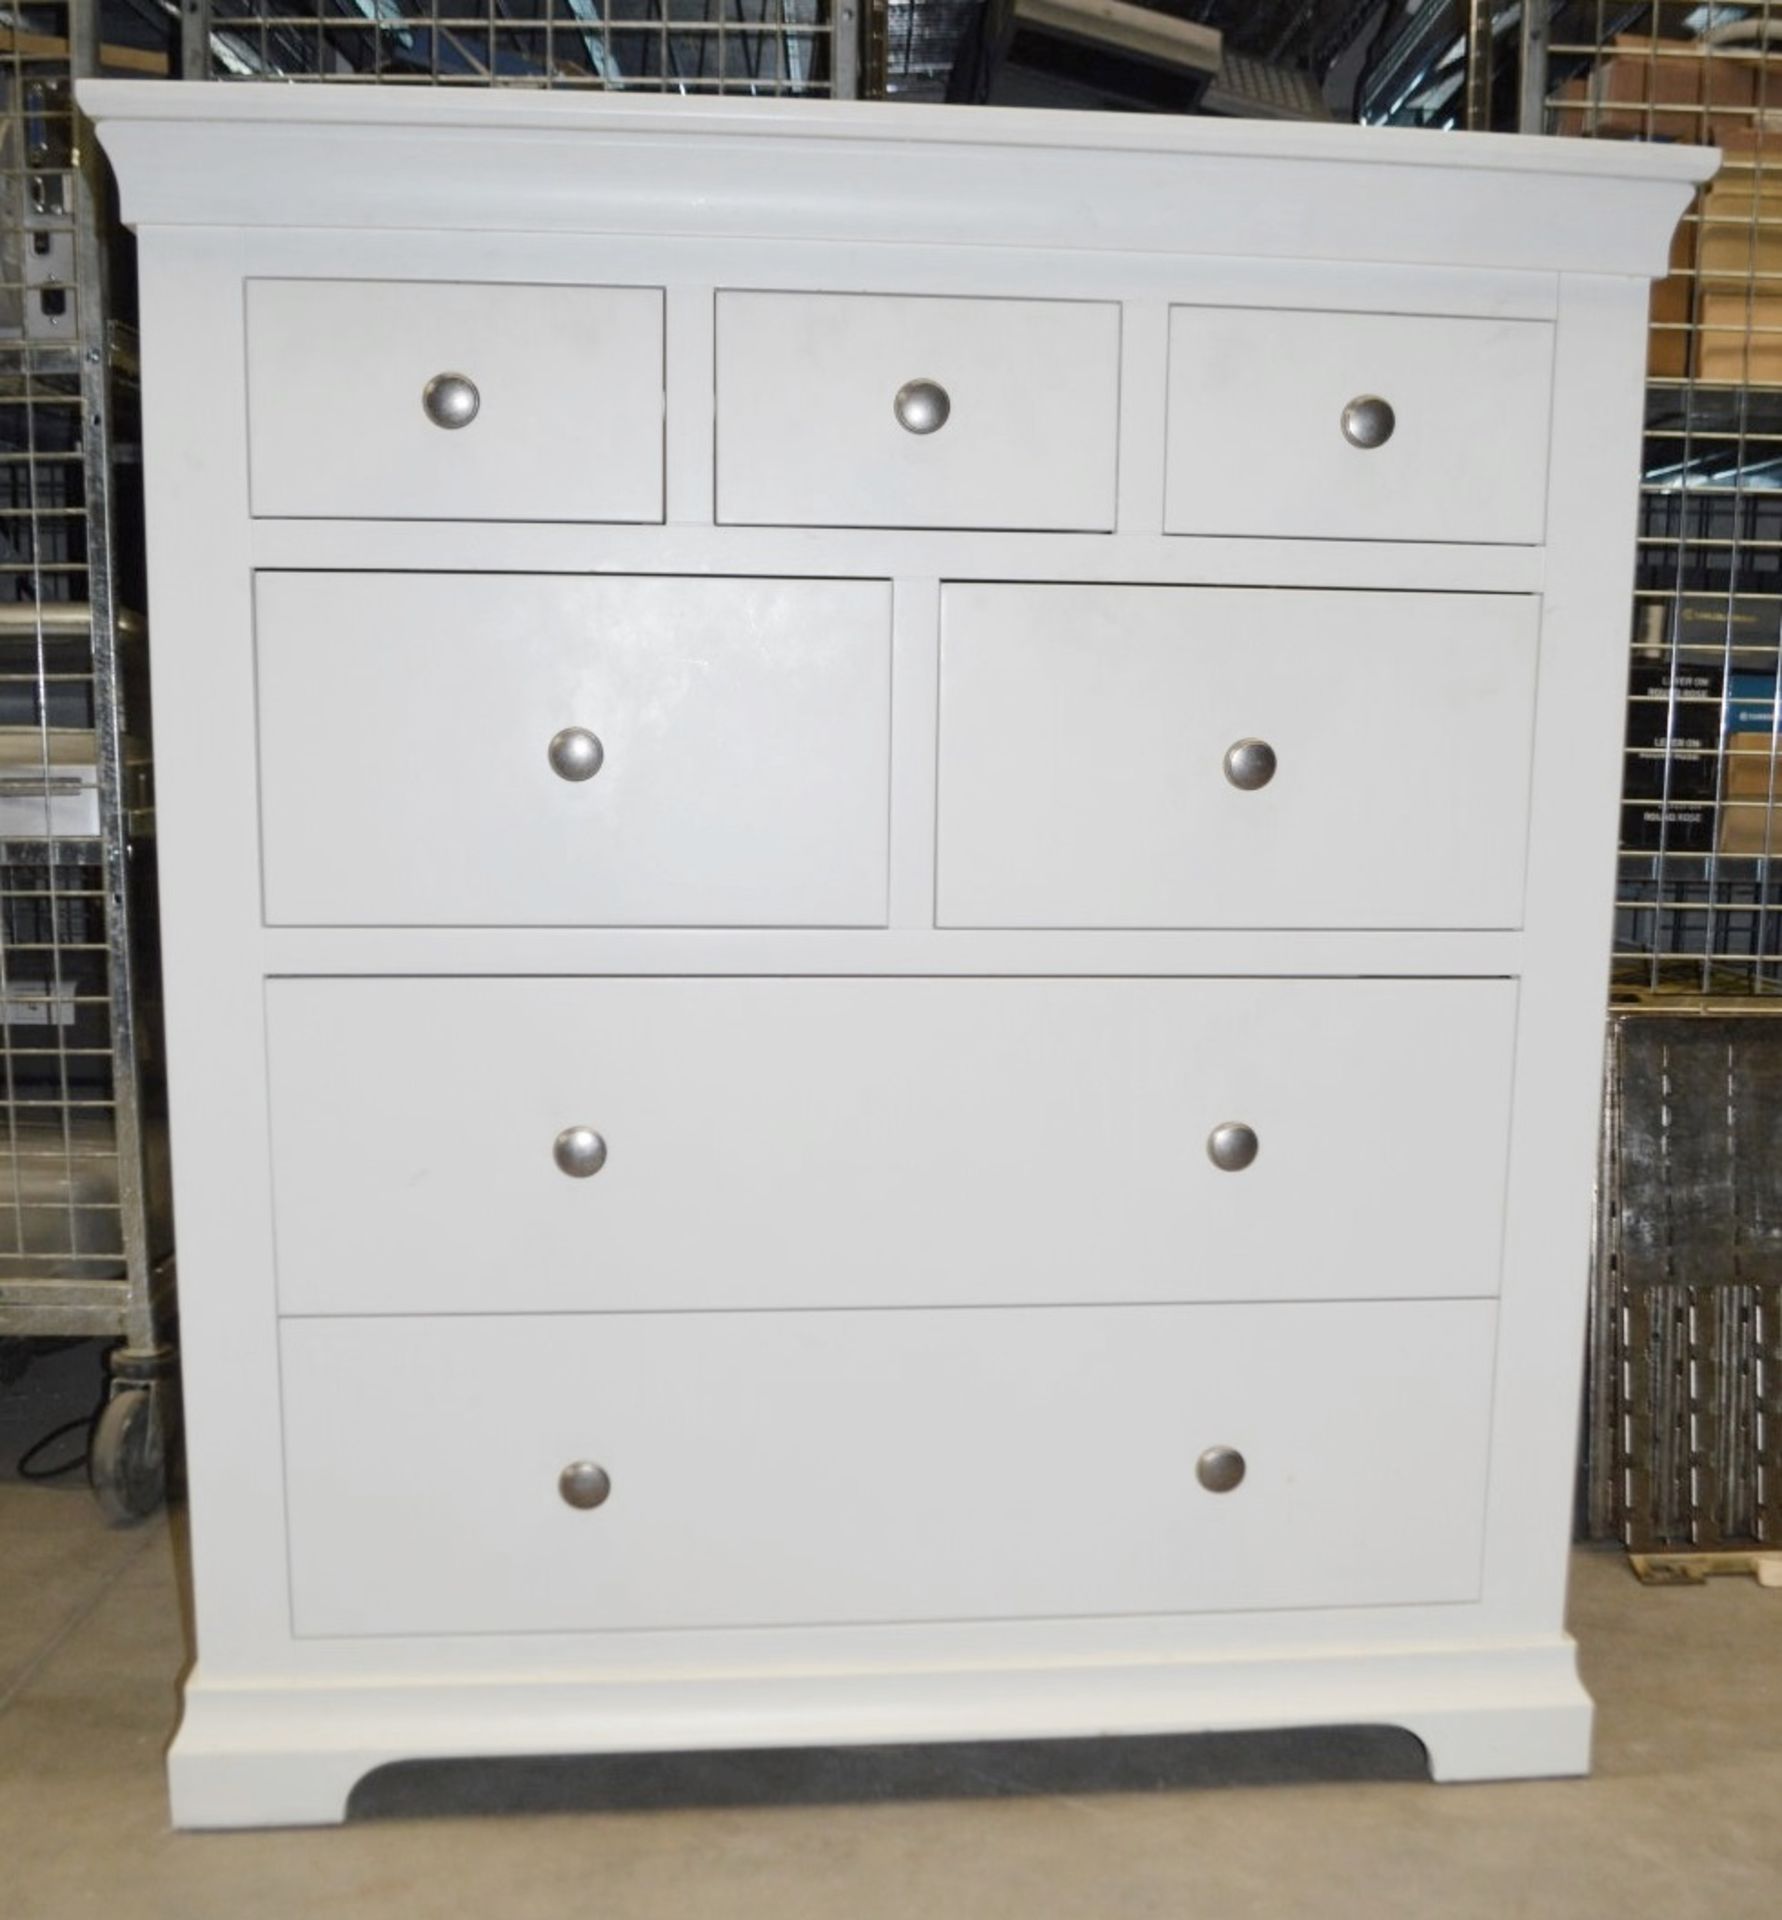 1 x Tall Drawer Unit In Cream - From An Exclusive Property In Hale Barns - Dimensions: 105 x 42 x